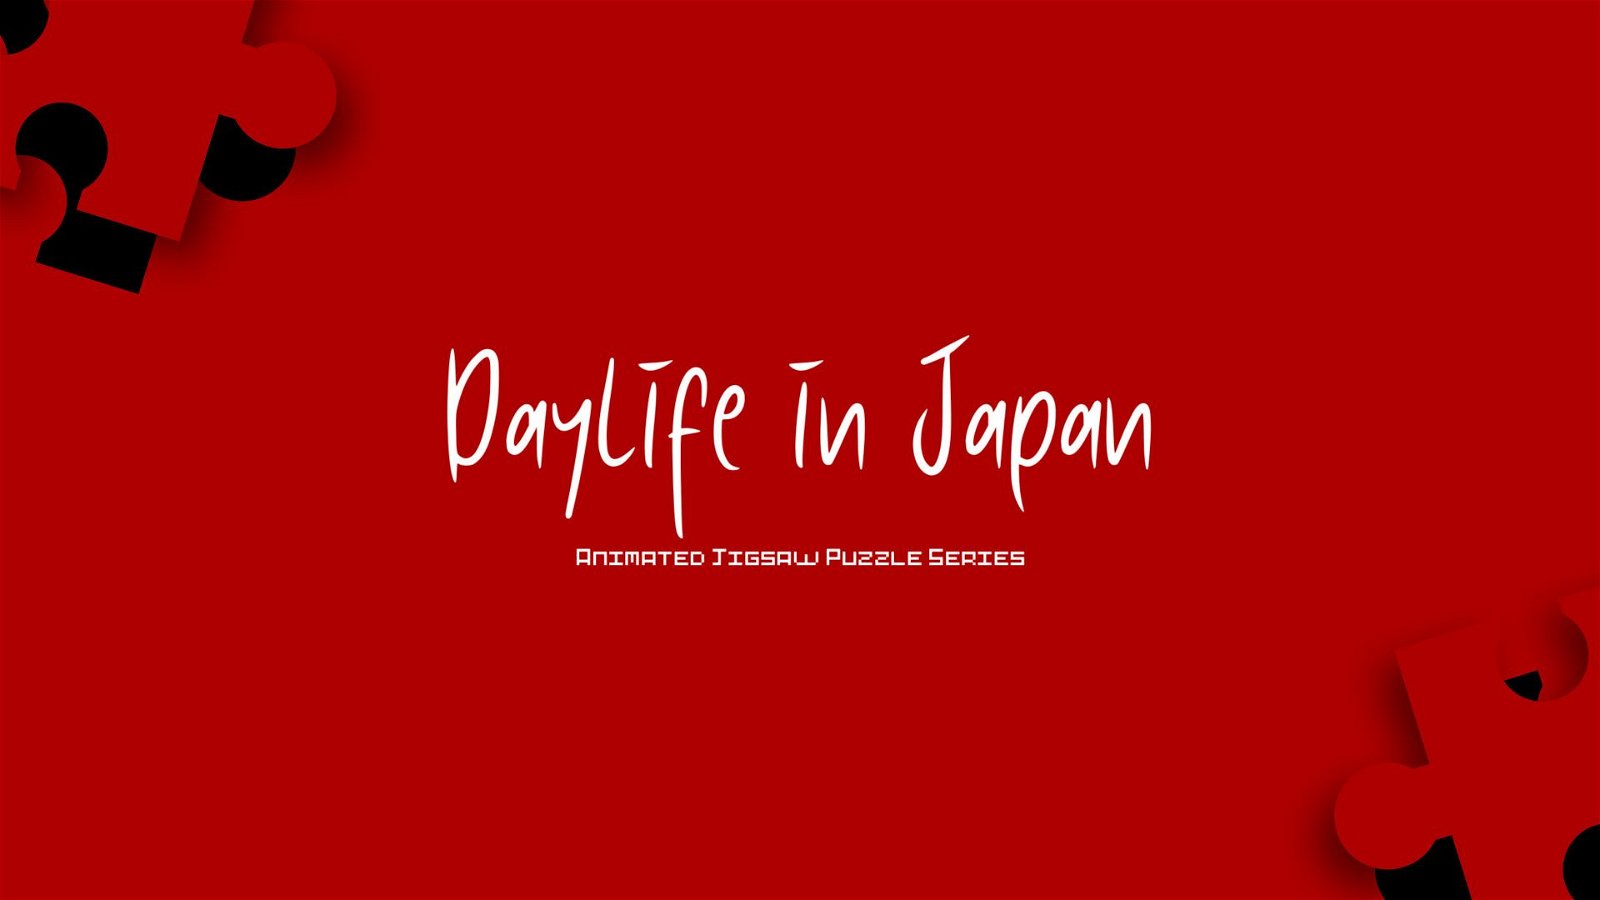 Image of Daylife in Japan - Animated Jigsaw Puzzle Series